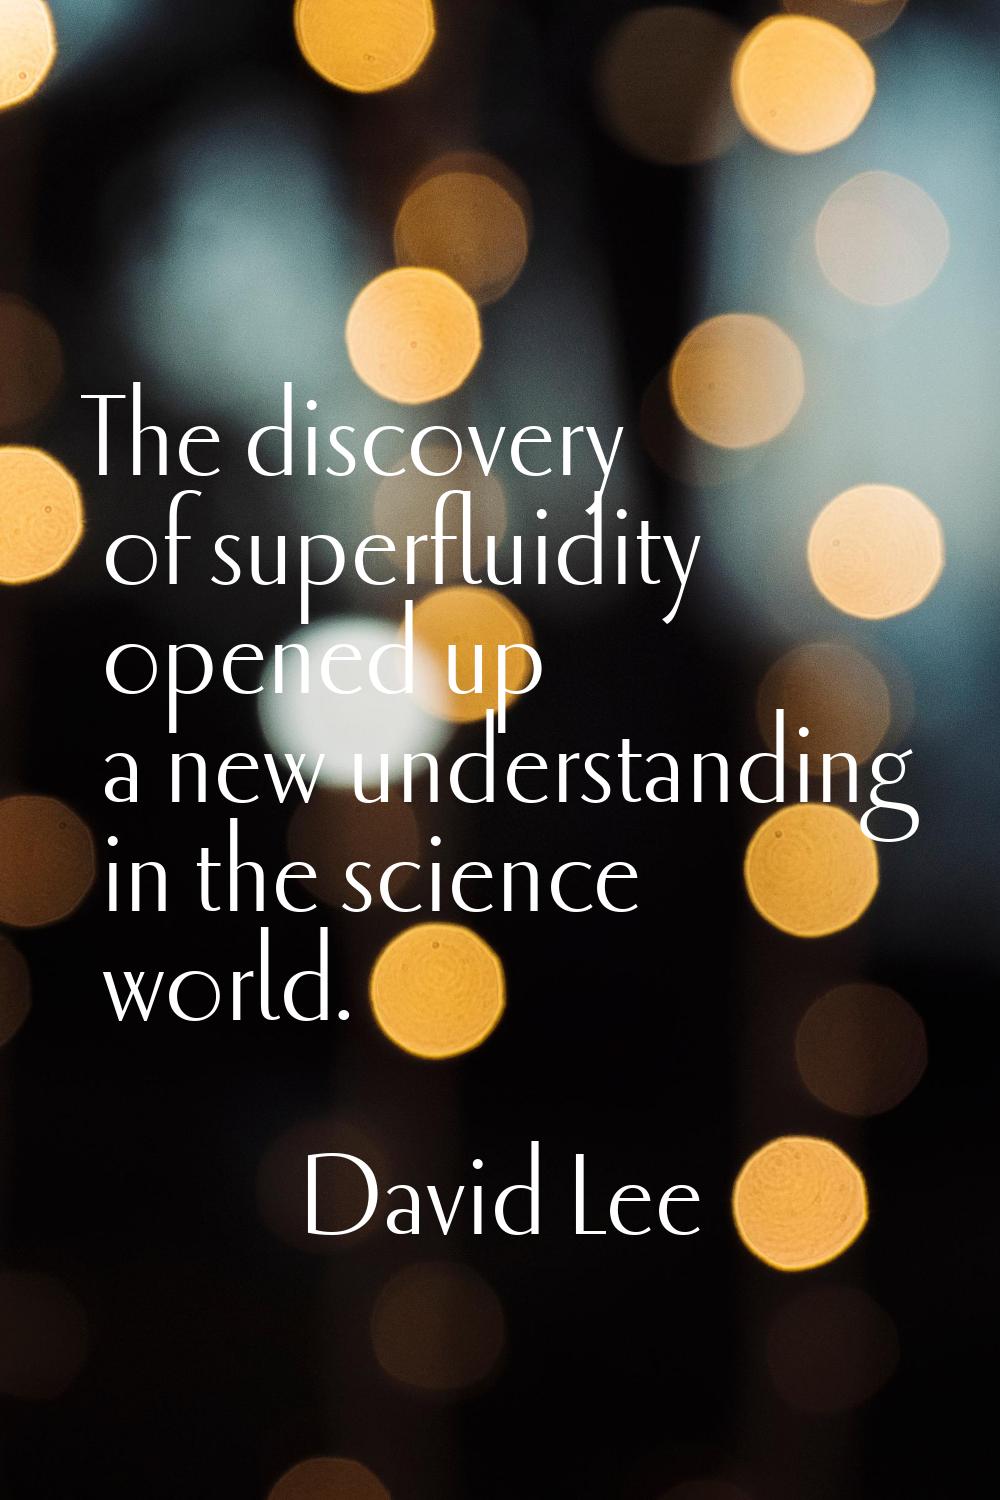 The discovery of superfluidity opened up a new understanding in the science world.